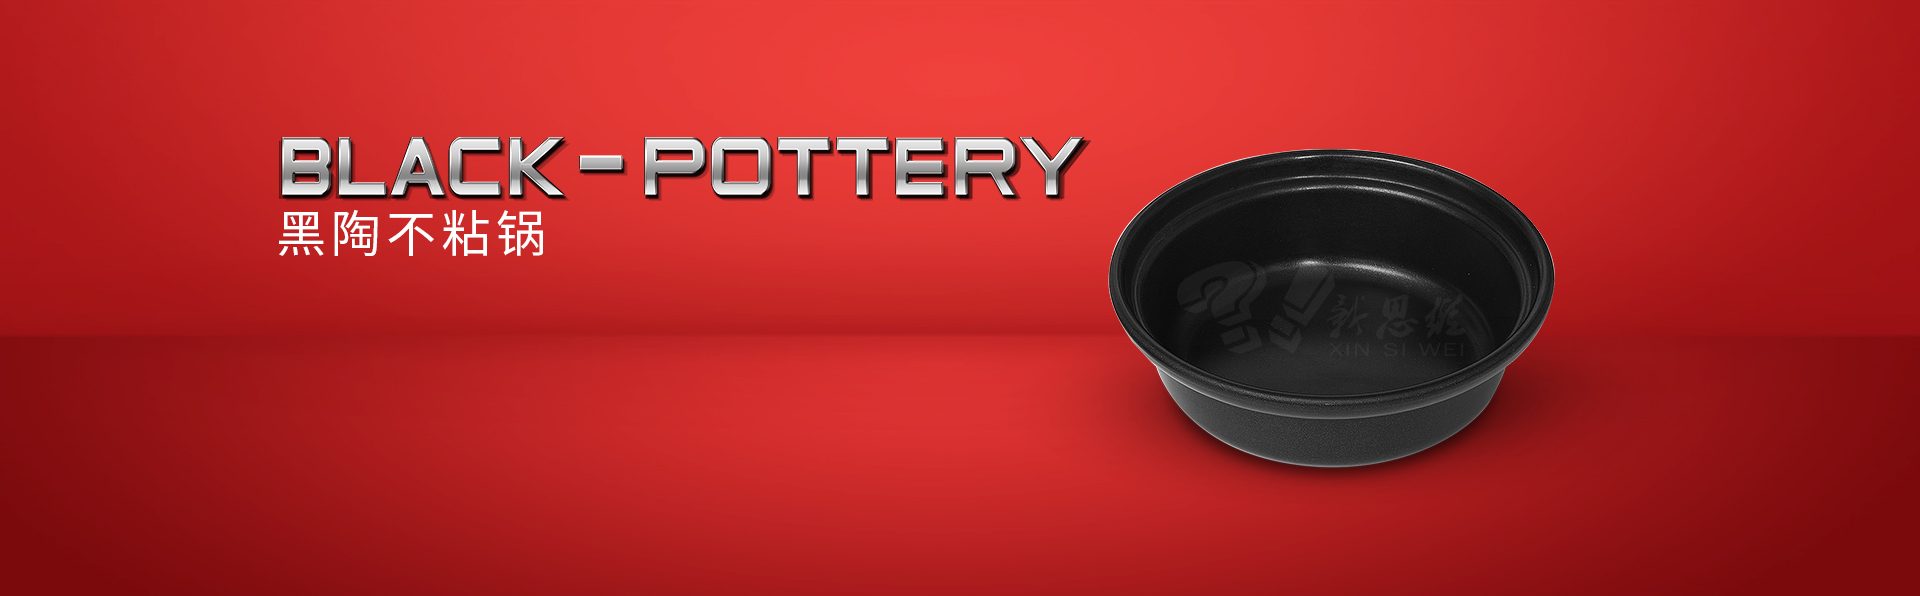 xinsiwei_supporing_materials_black_pottery_non_stick_pot_details_page.jpg